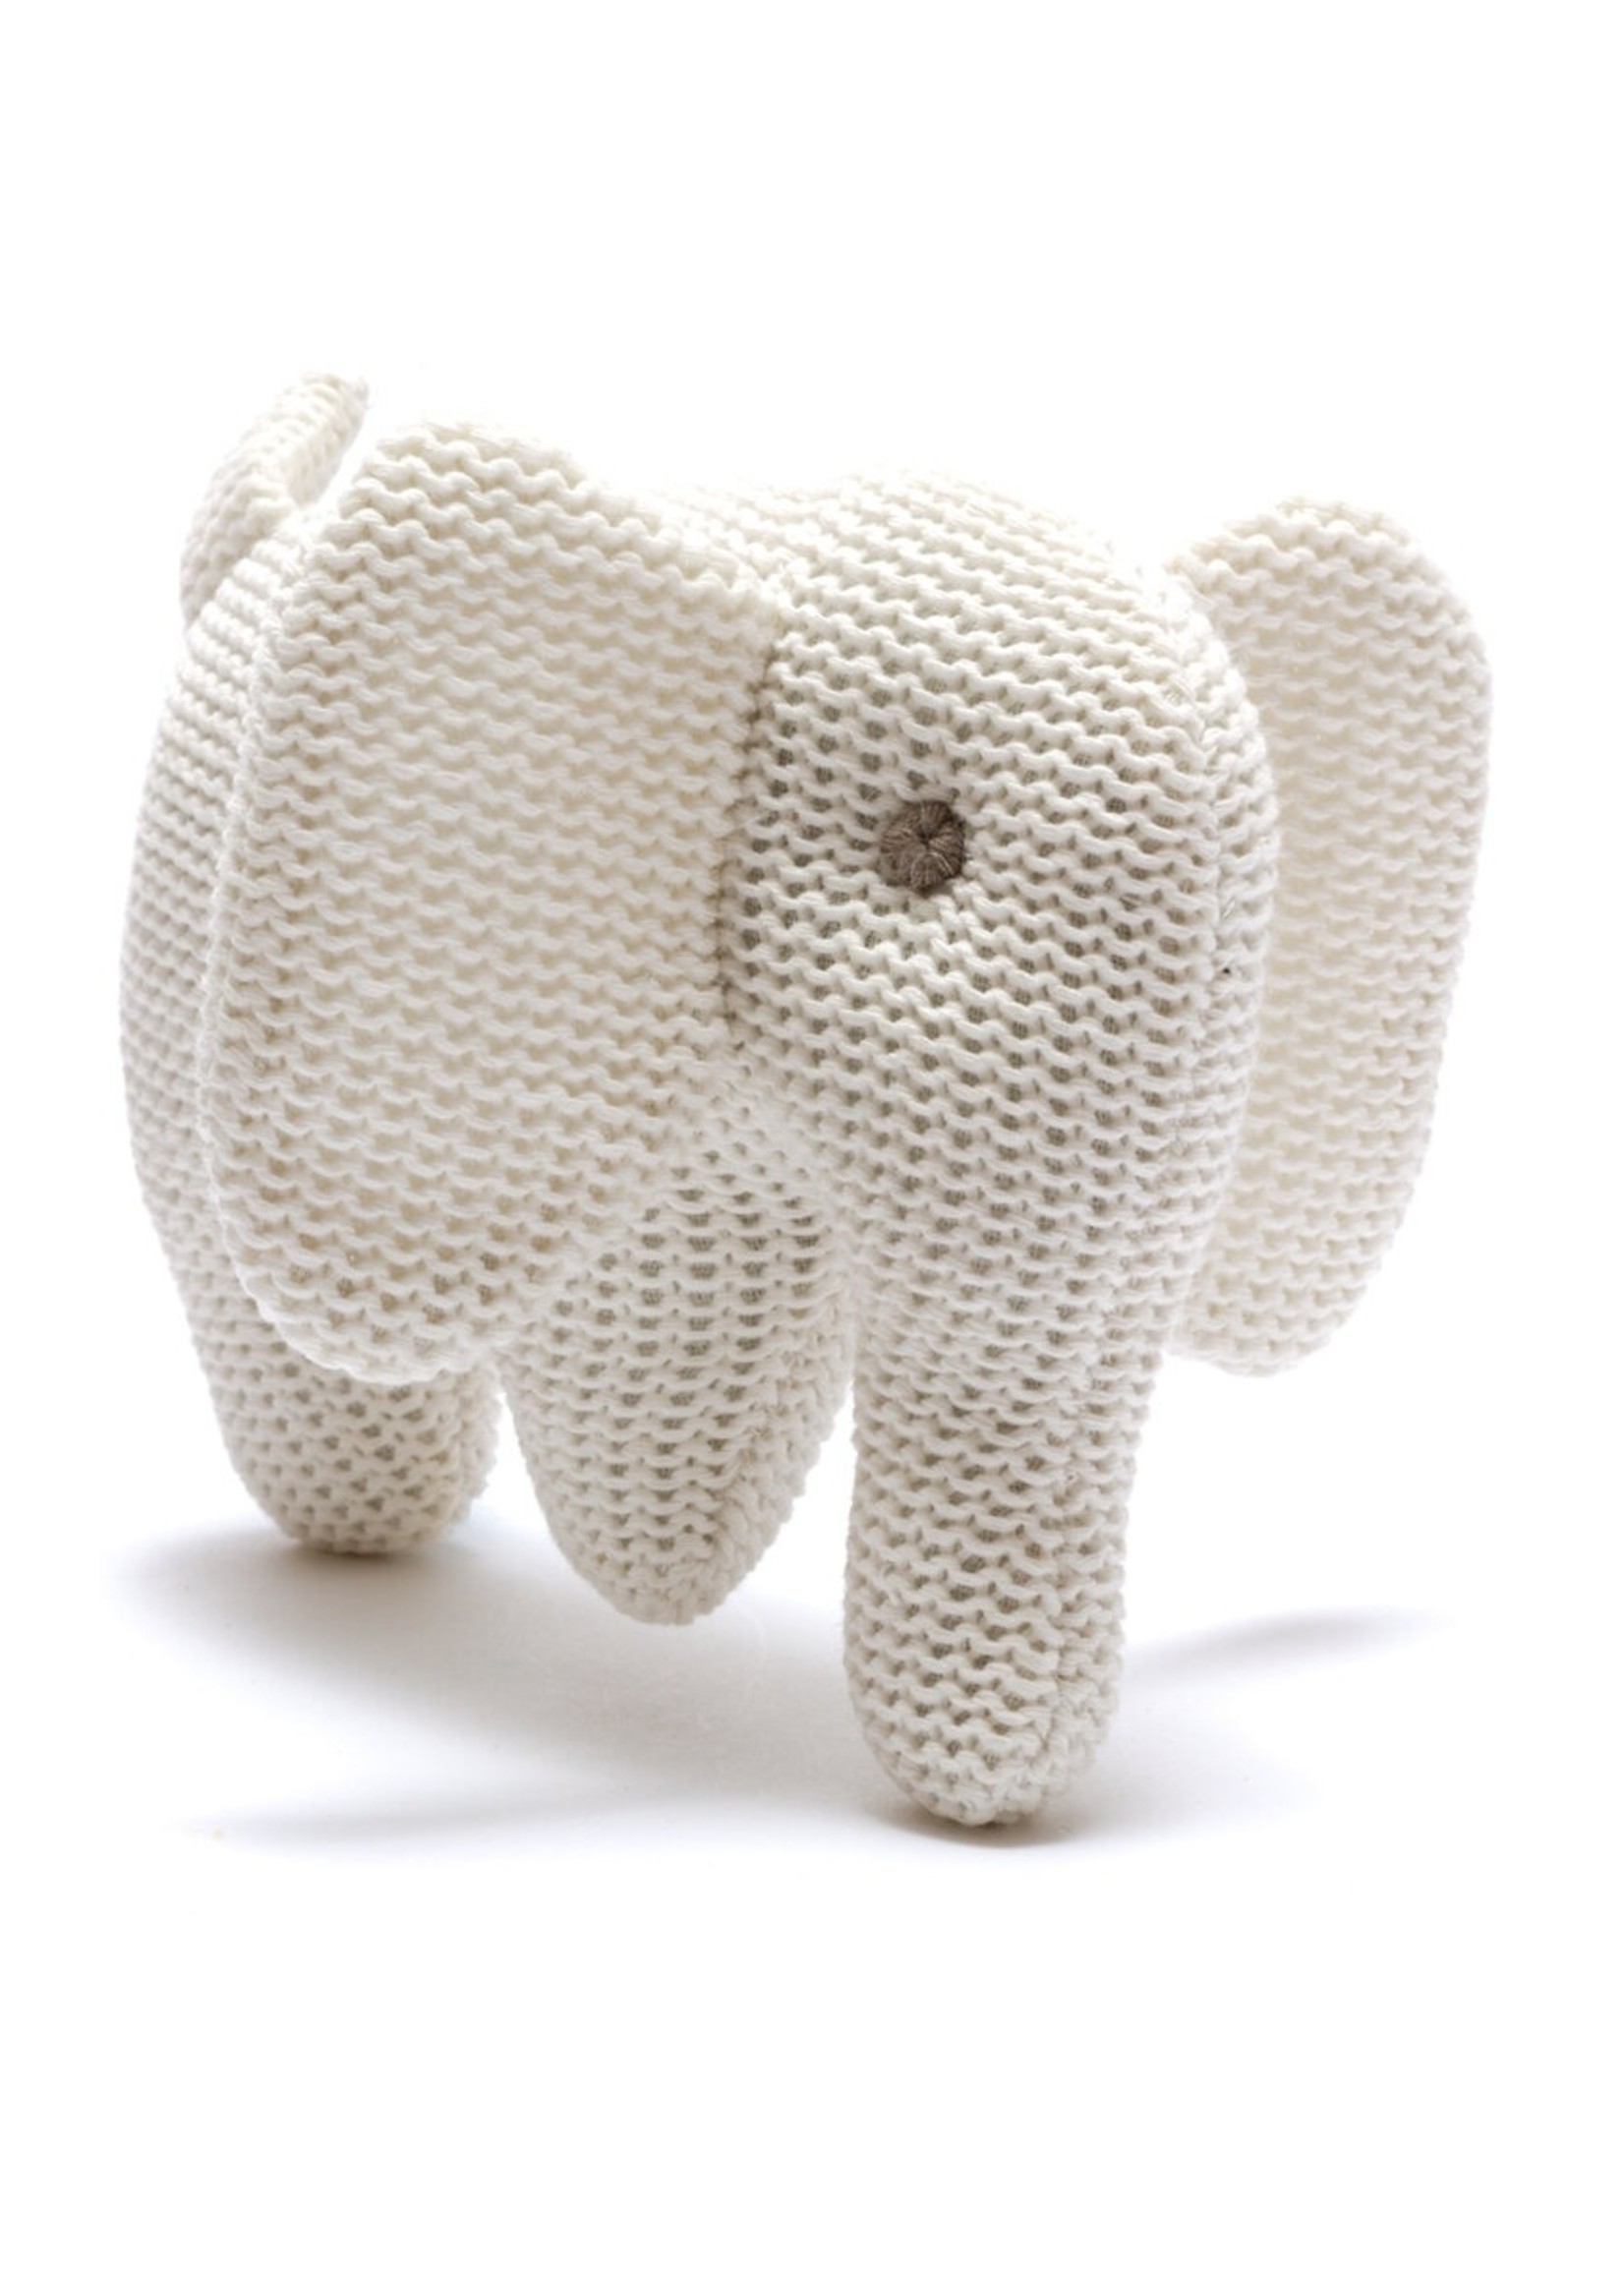 Best Years Ltd Knitted Organic Cotton White Elephant Baby Rattle